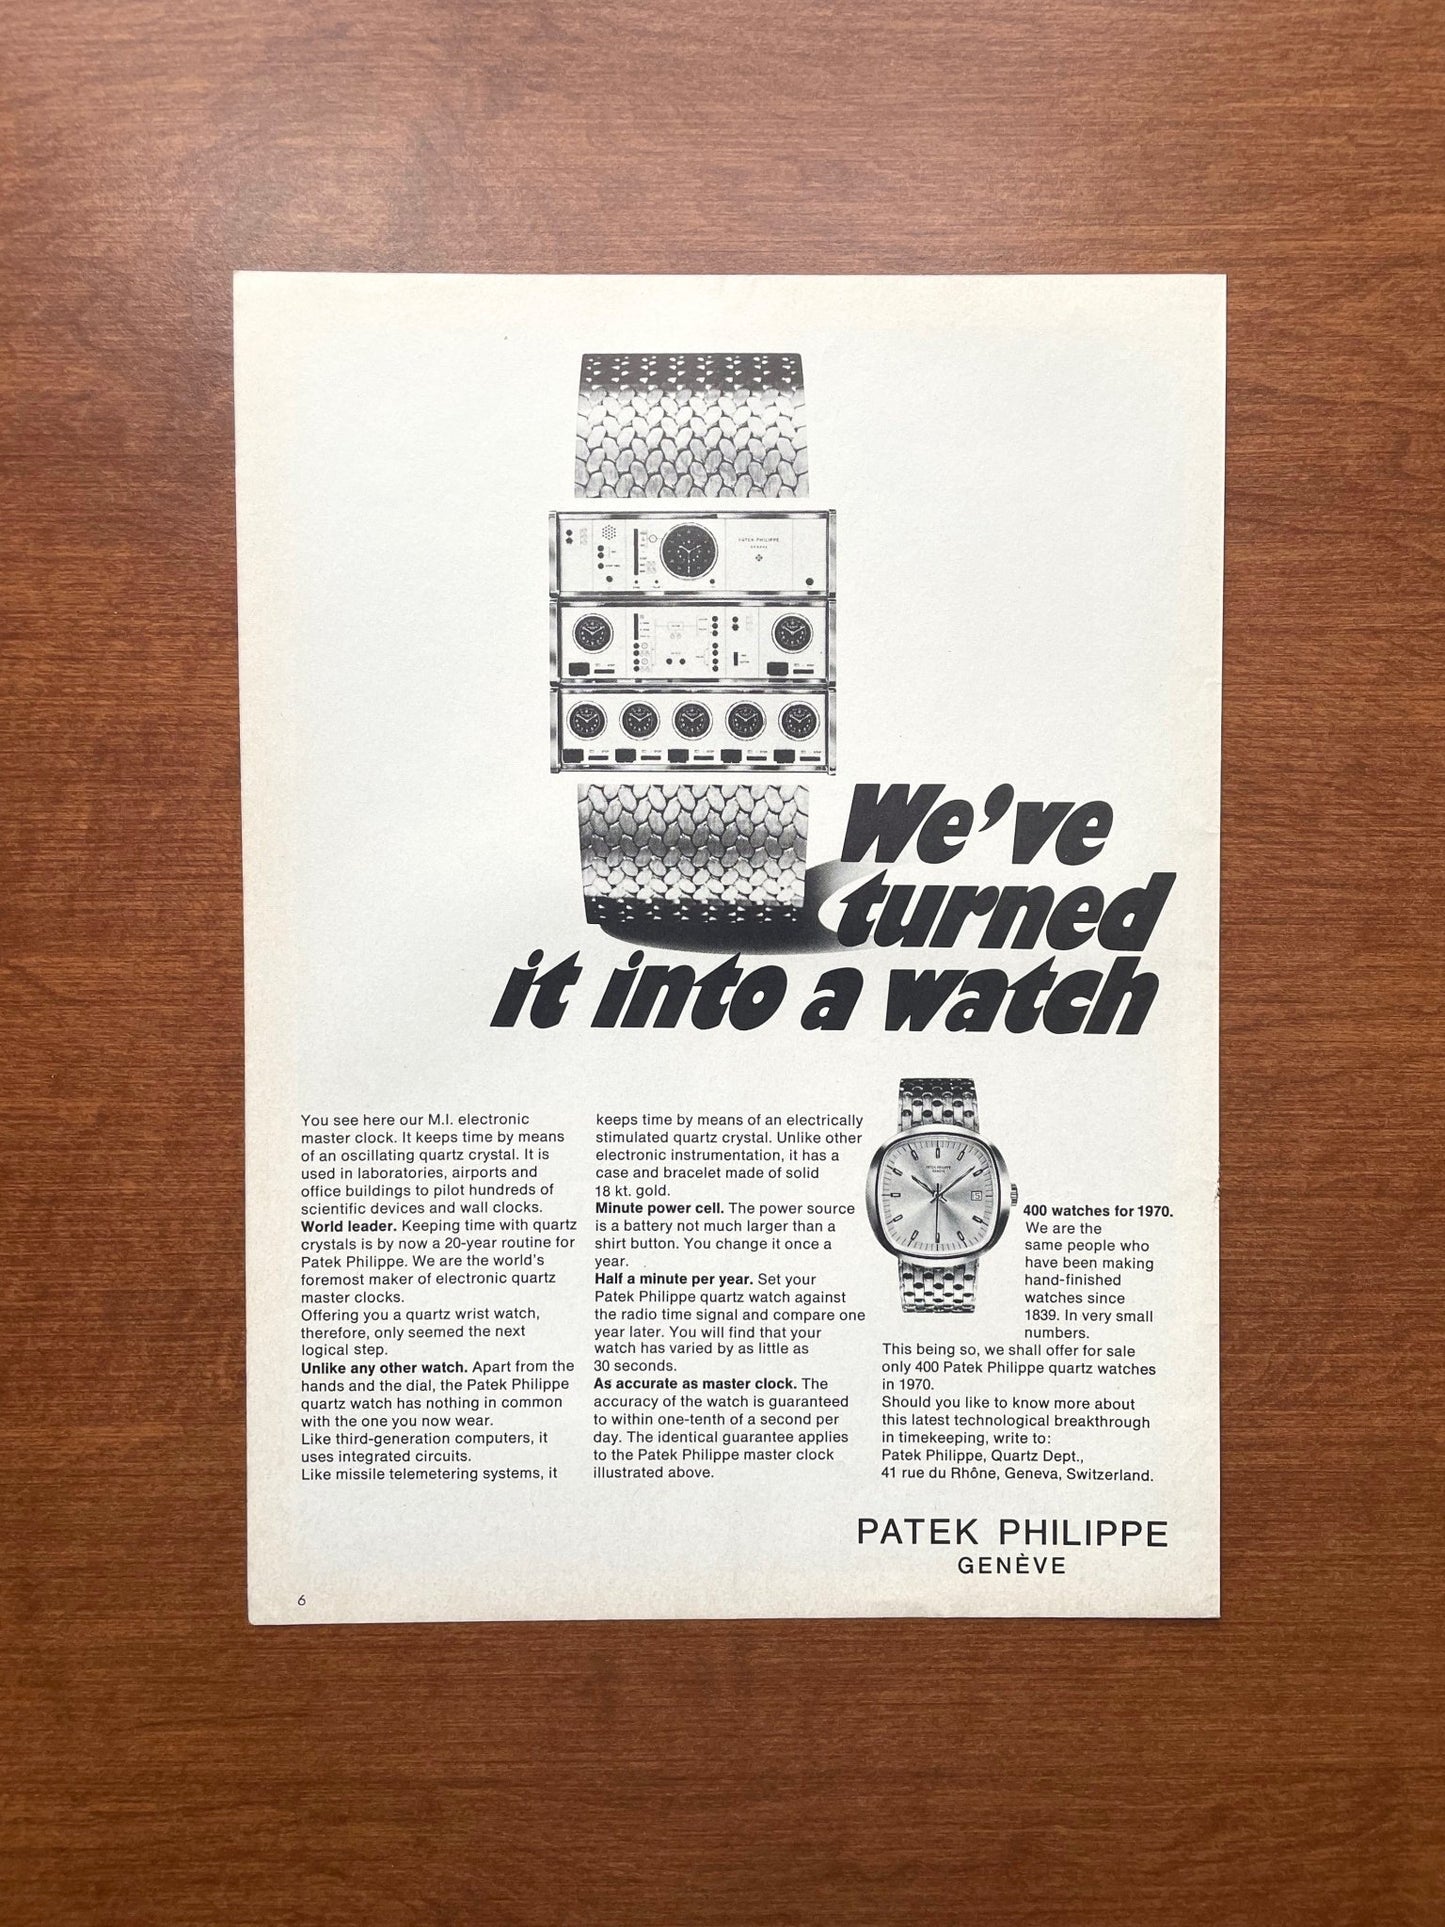 1970 Patek Philippe "We've turned it into a watch" Advertisement